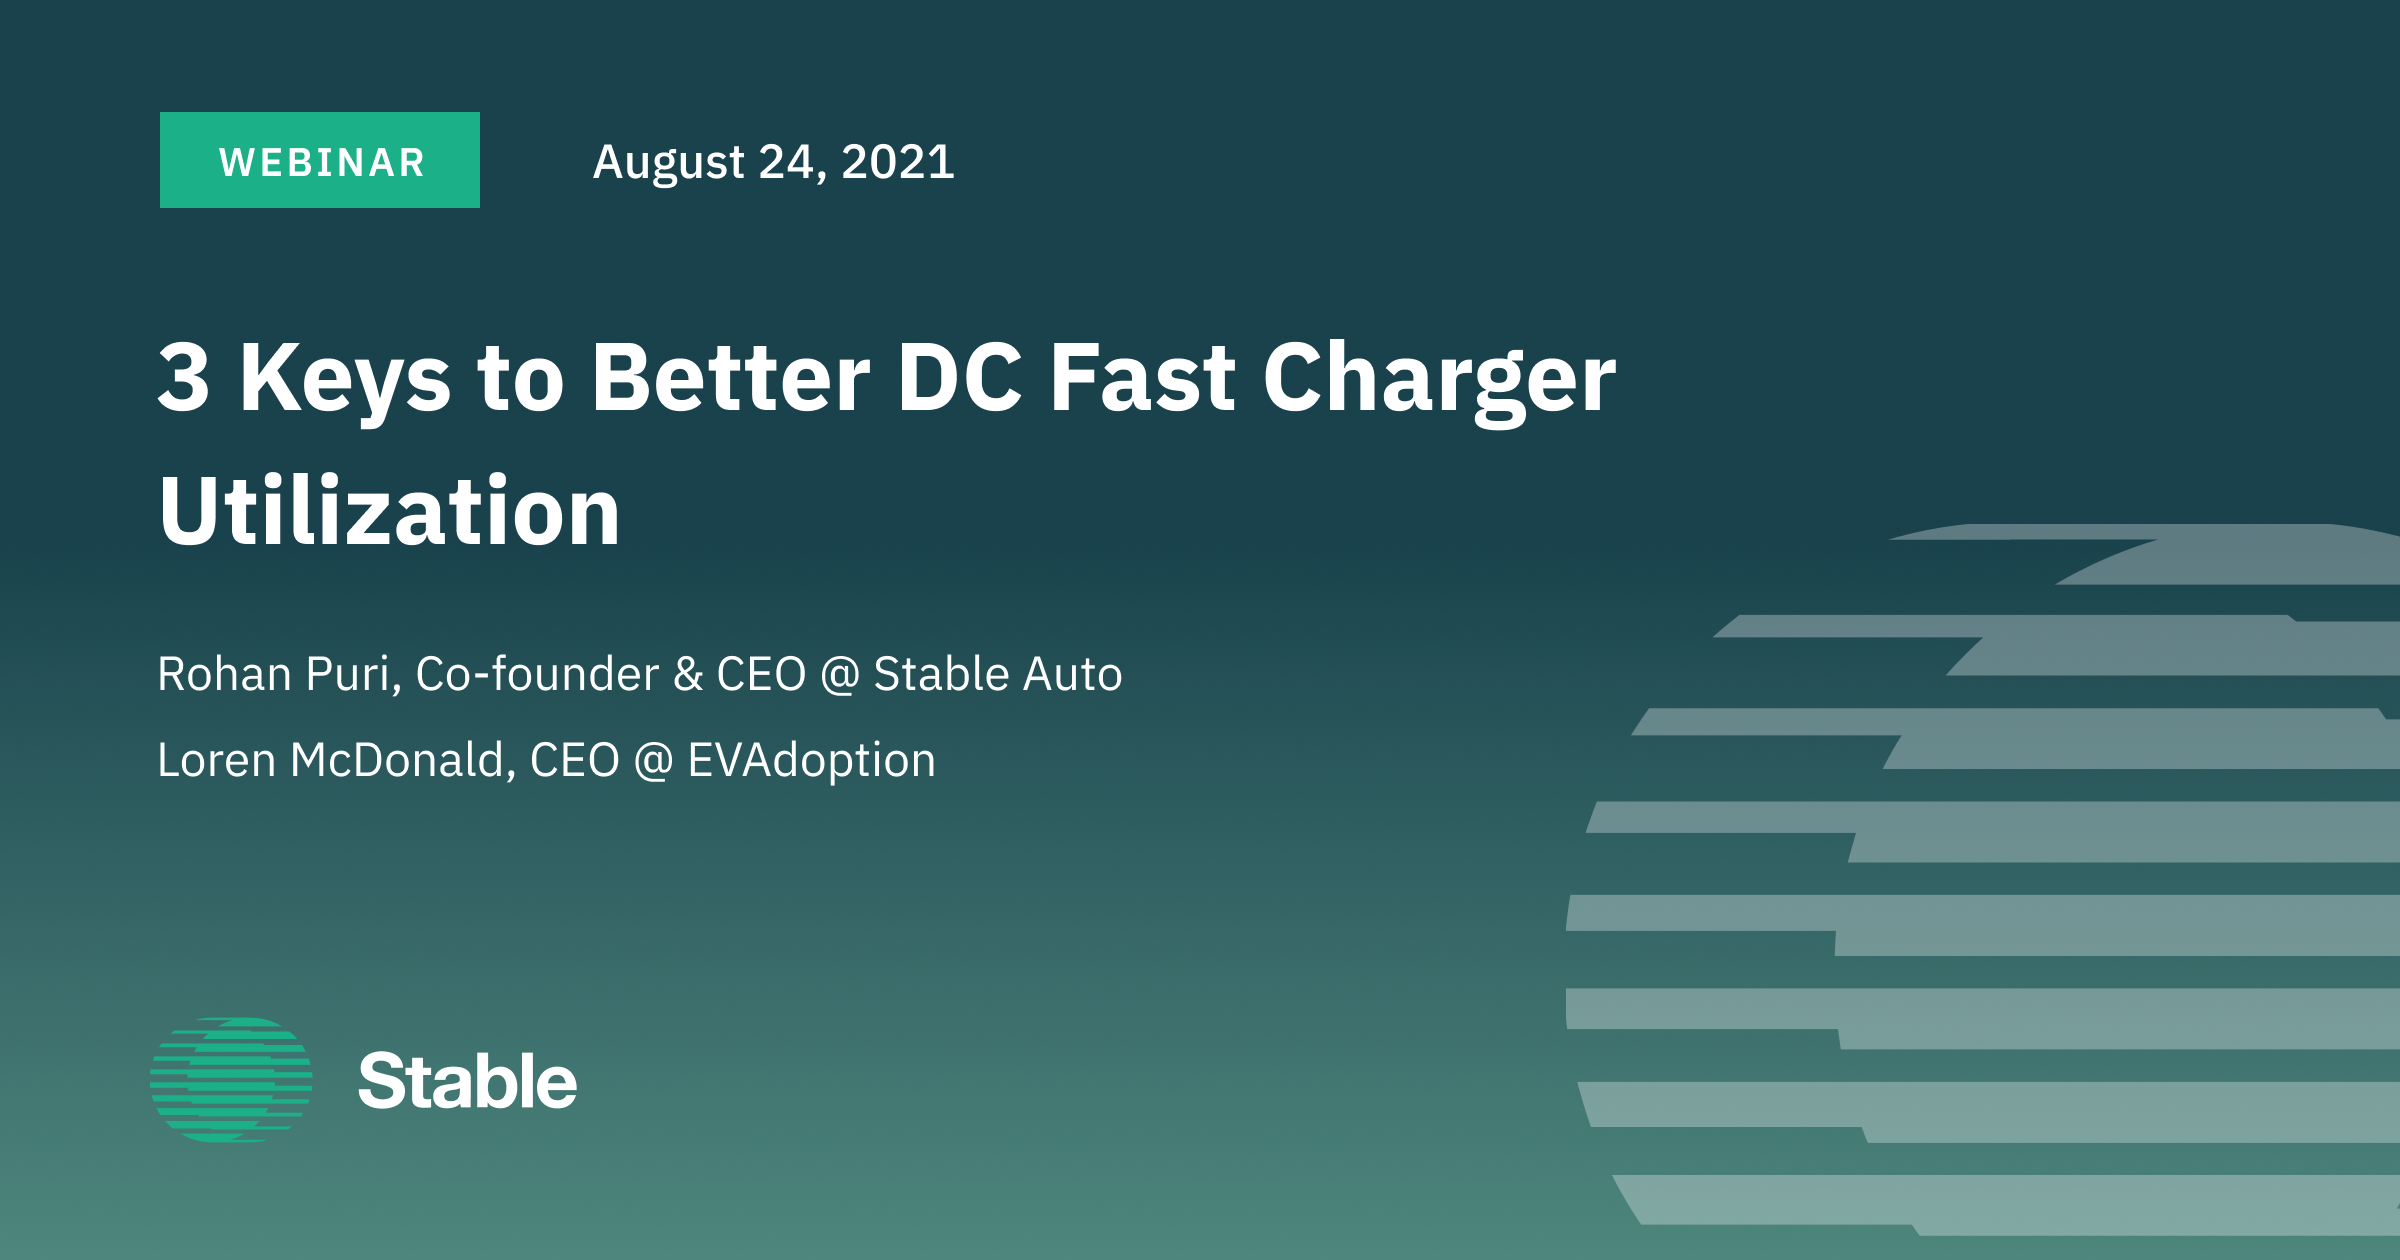 3 Keys to Better DC Fast Charger Utilization